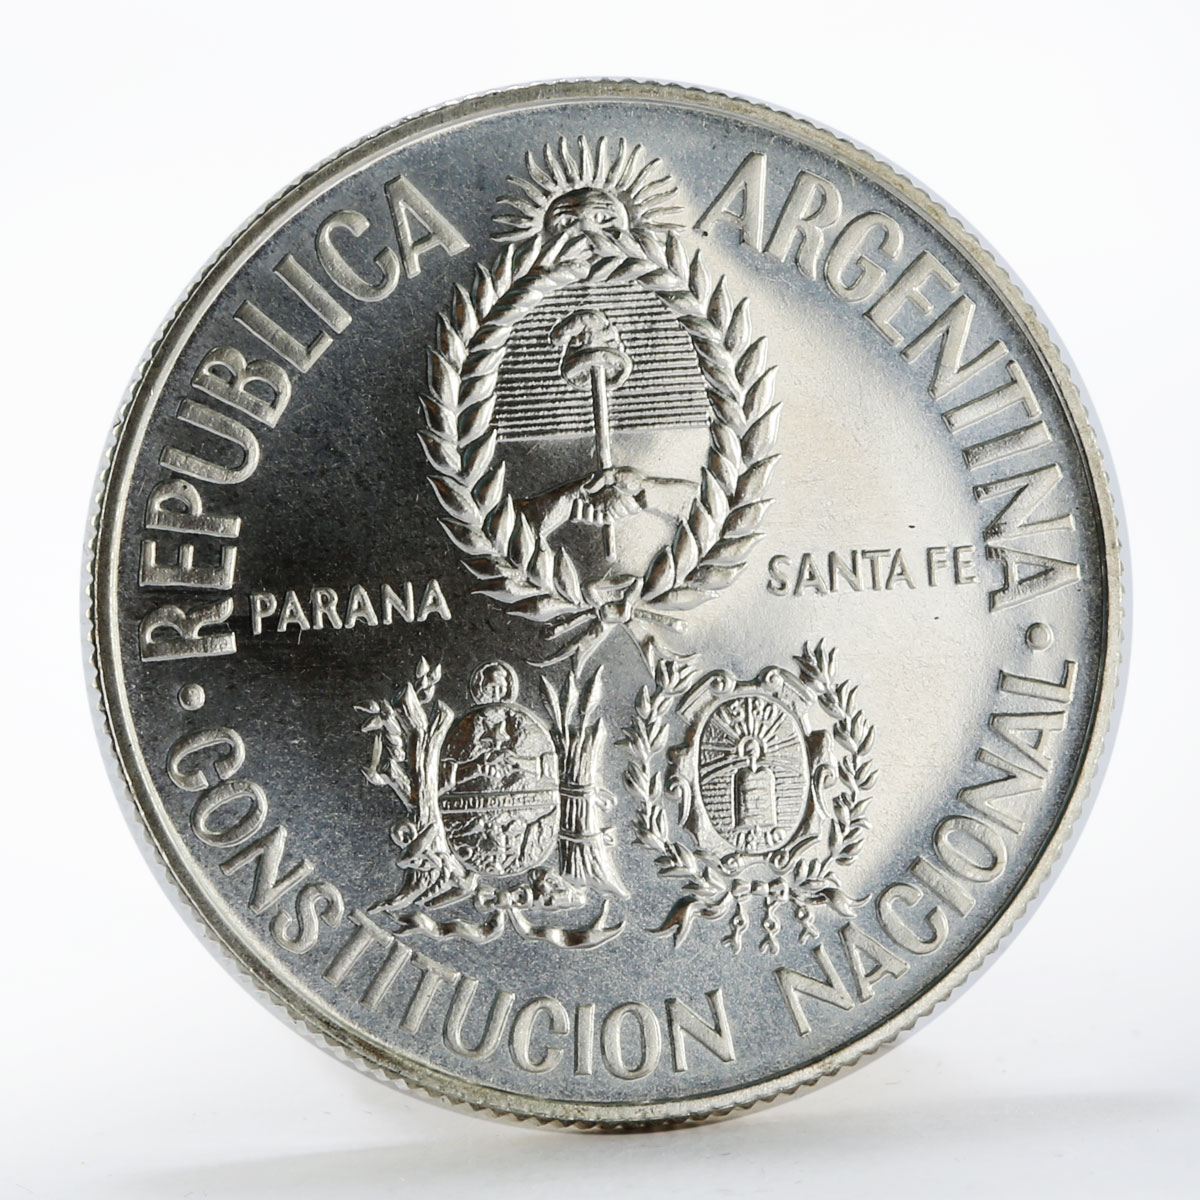 Argentina 2 pesos National Constitution Convention silver coin 1994